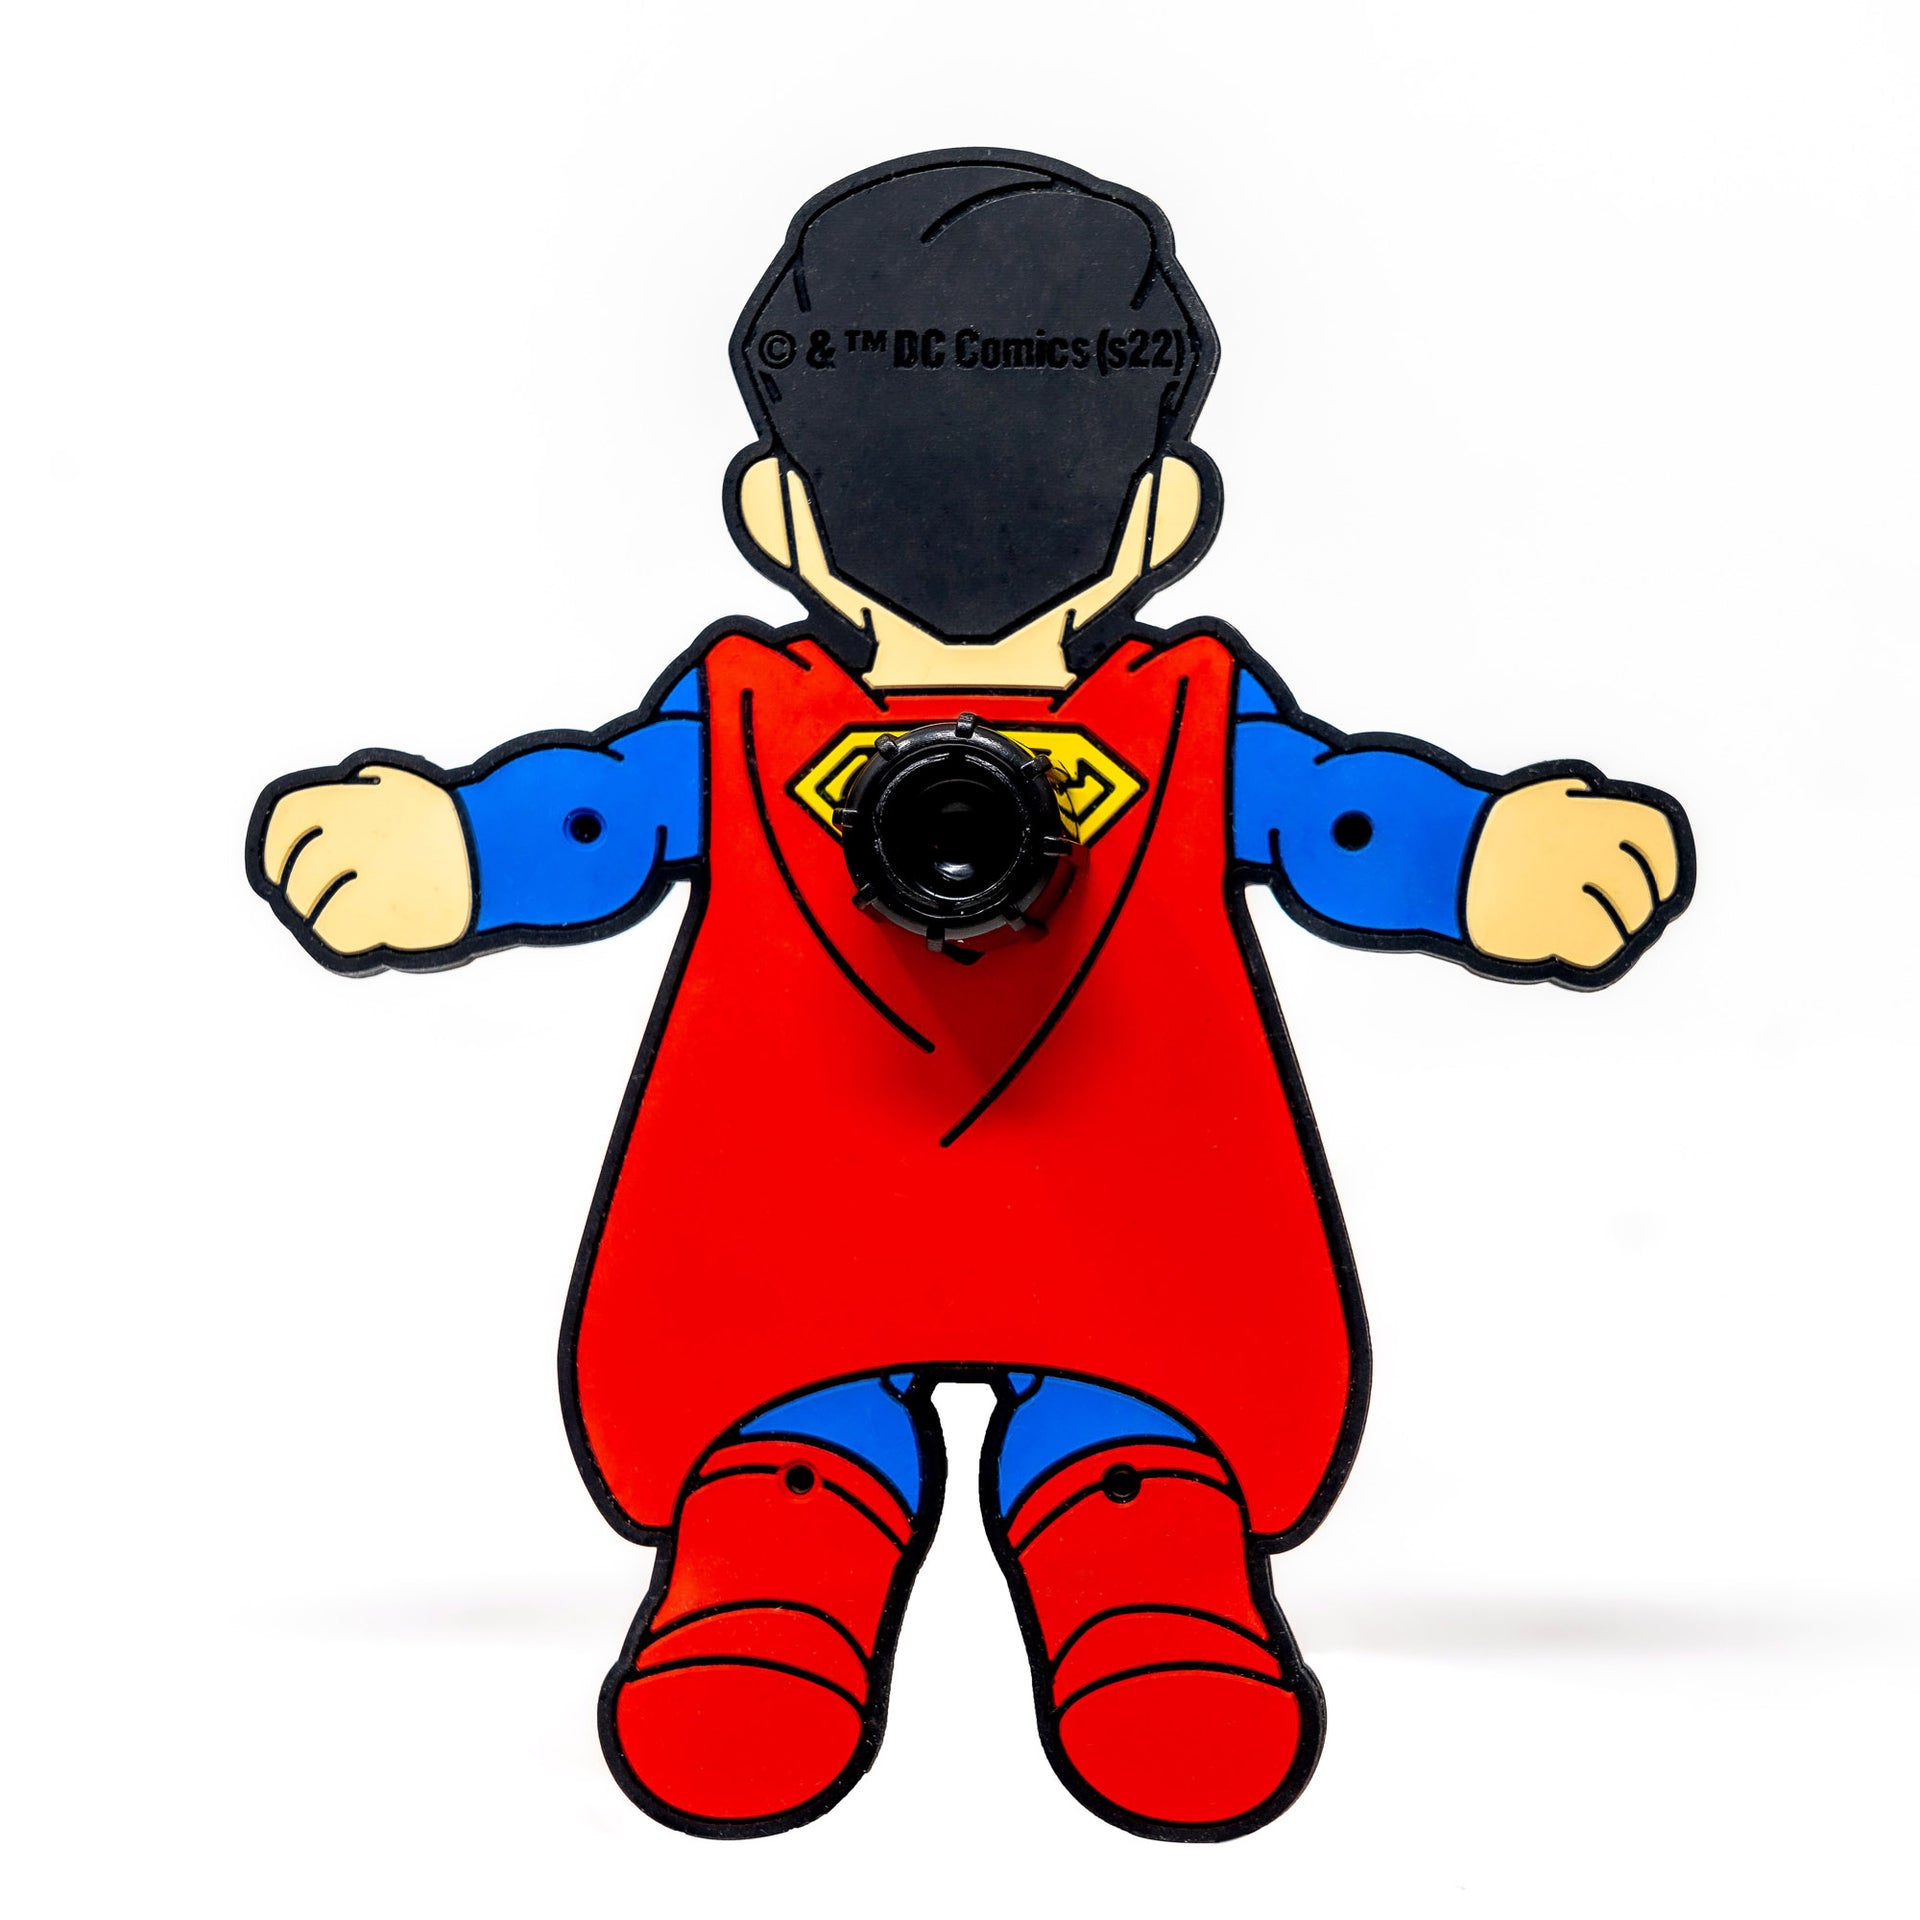 Image of DC Comics Superman Hug Buddy showing the back of the figure and a close-up of the vent clip holder, on a white background